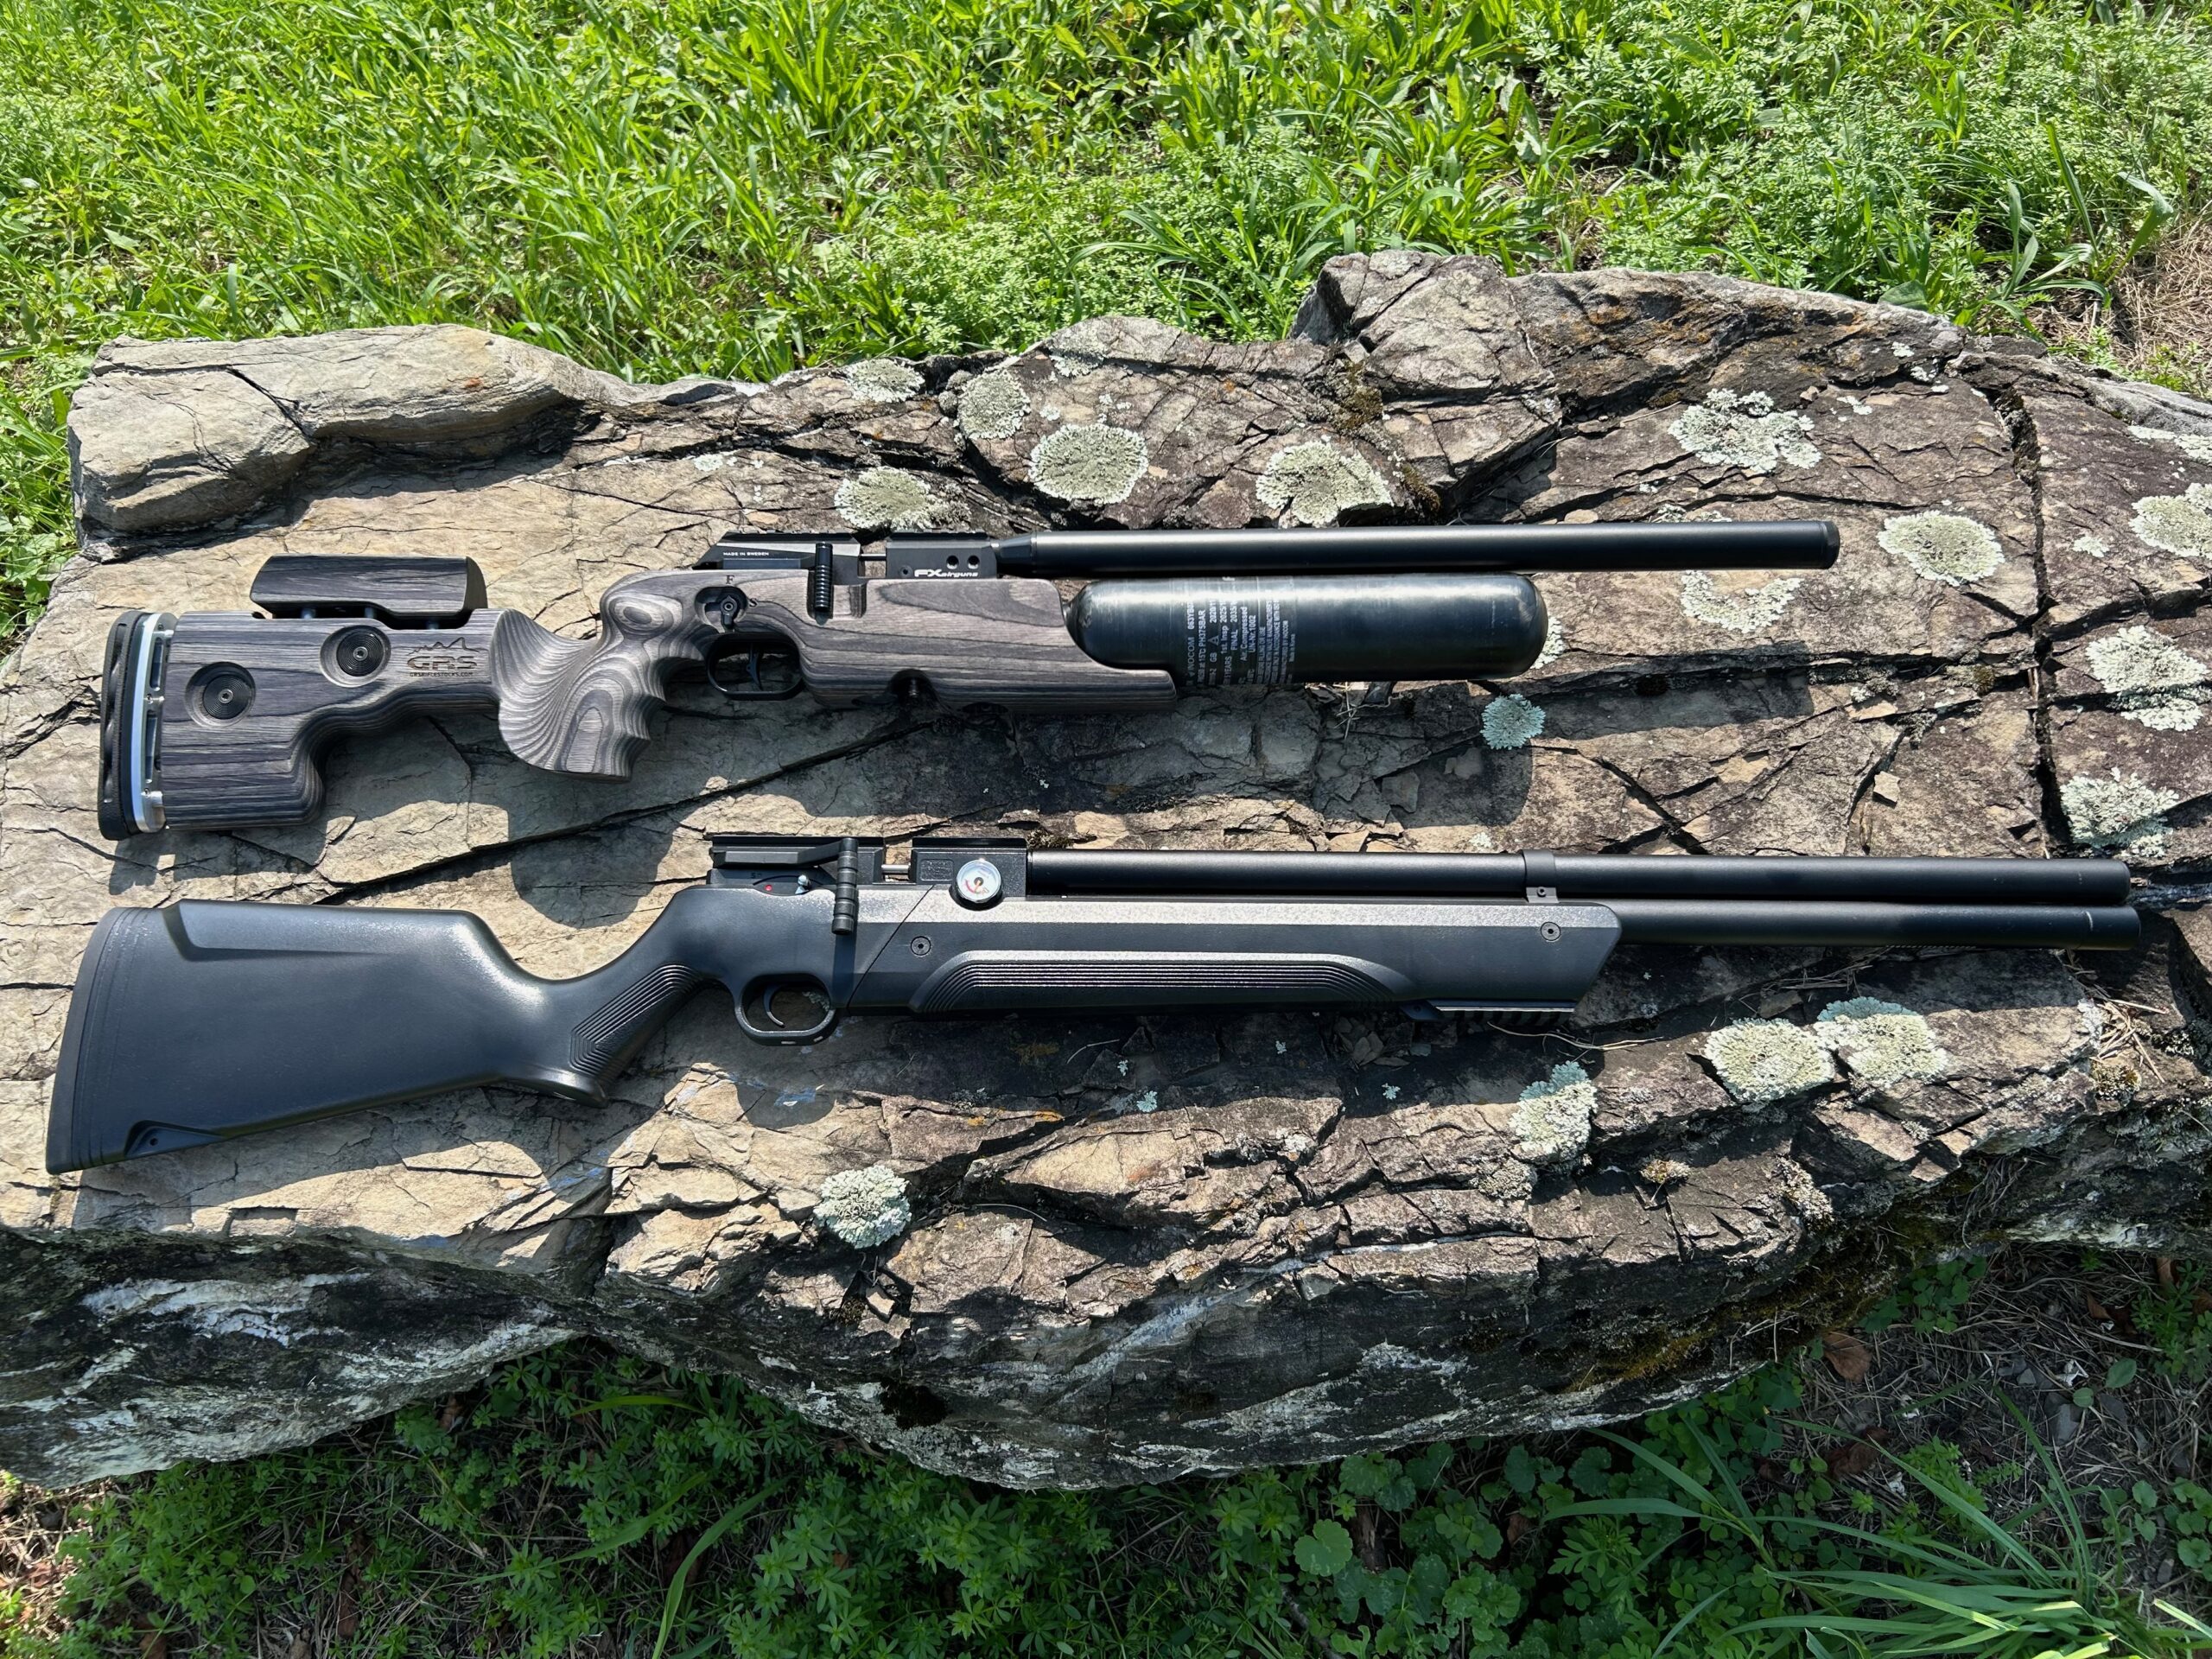 Two of the best options for PCP air rifles